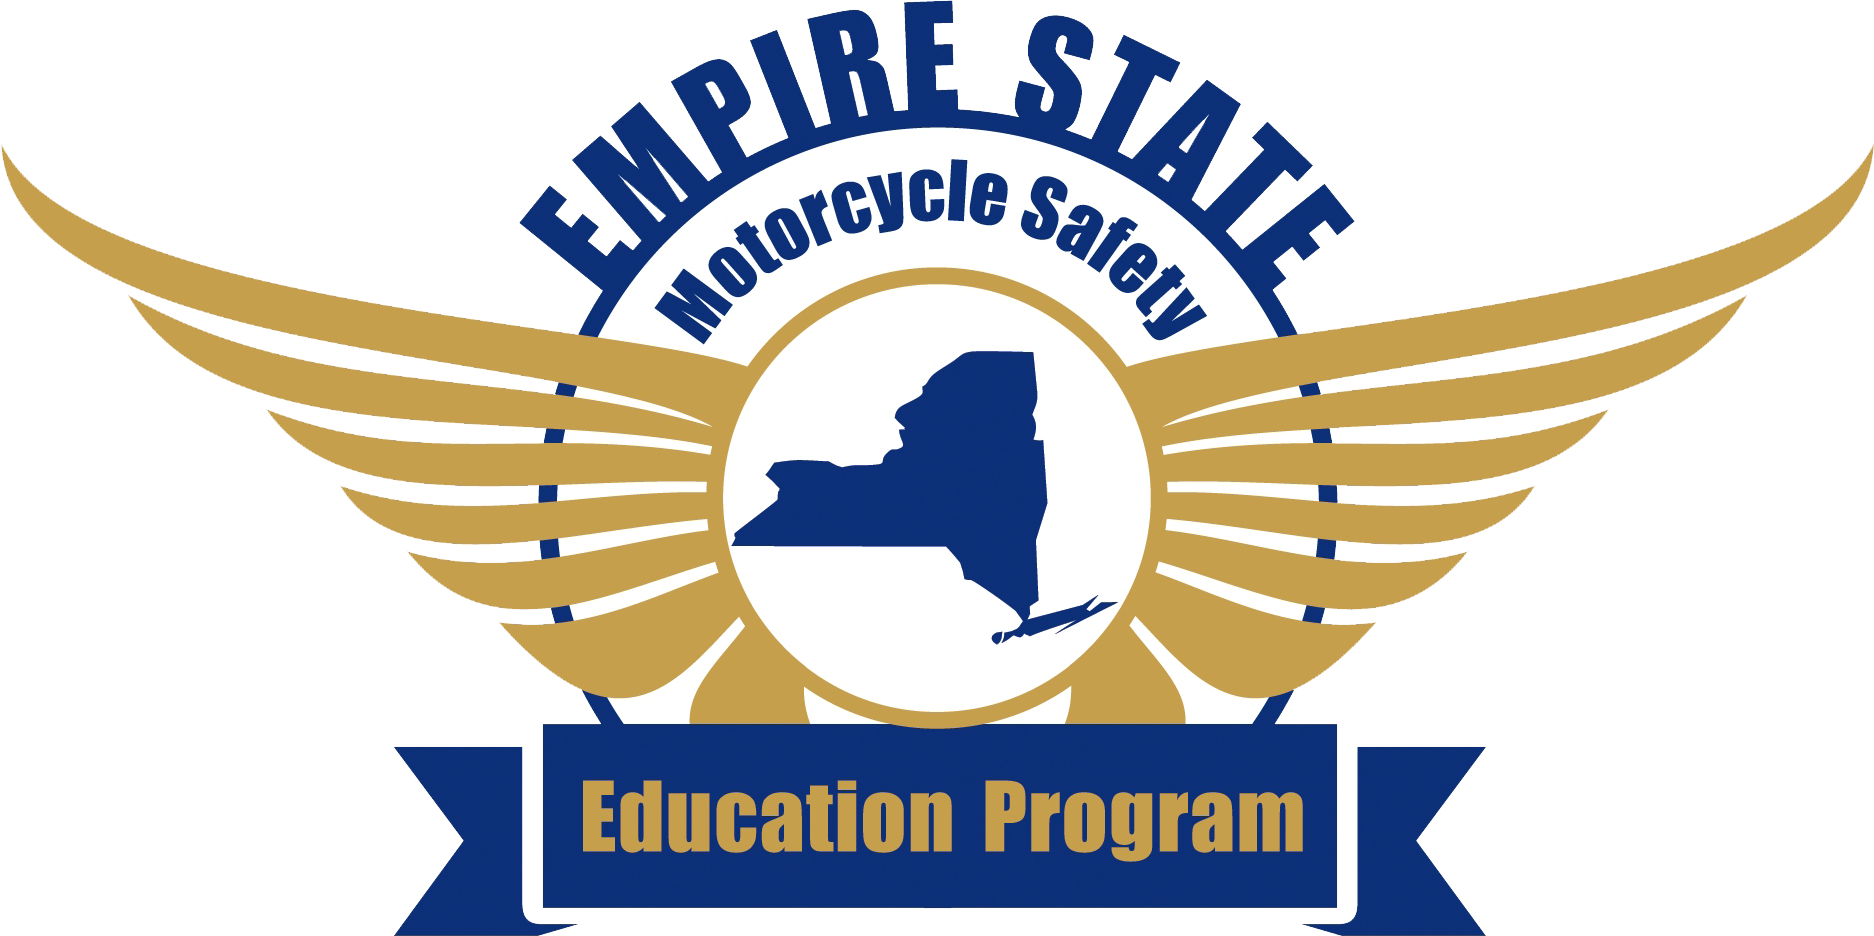 Empire State Motorcycle Safety Program